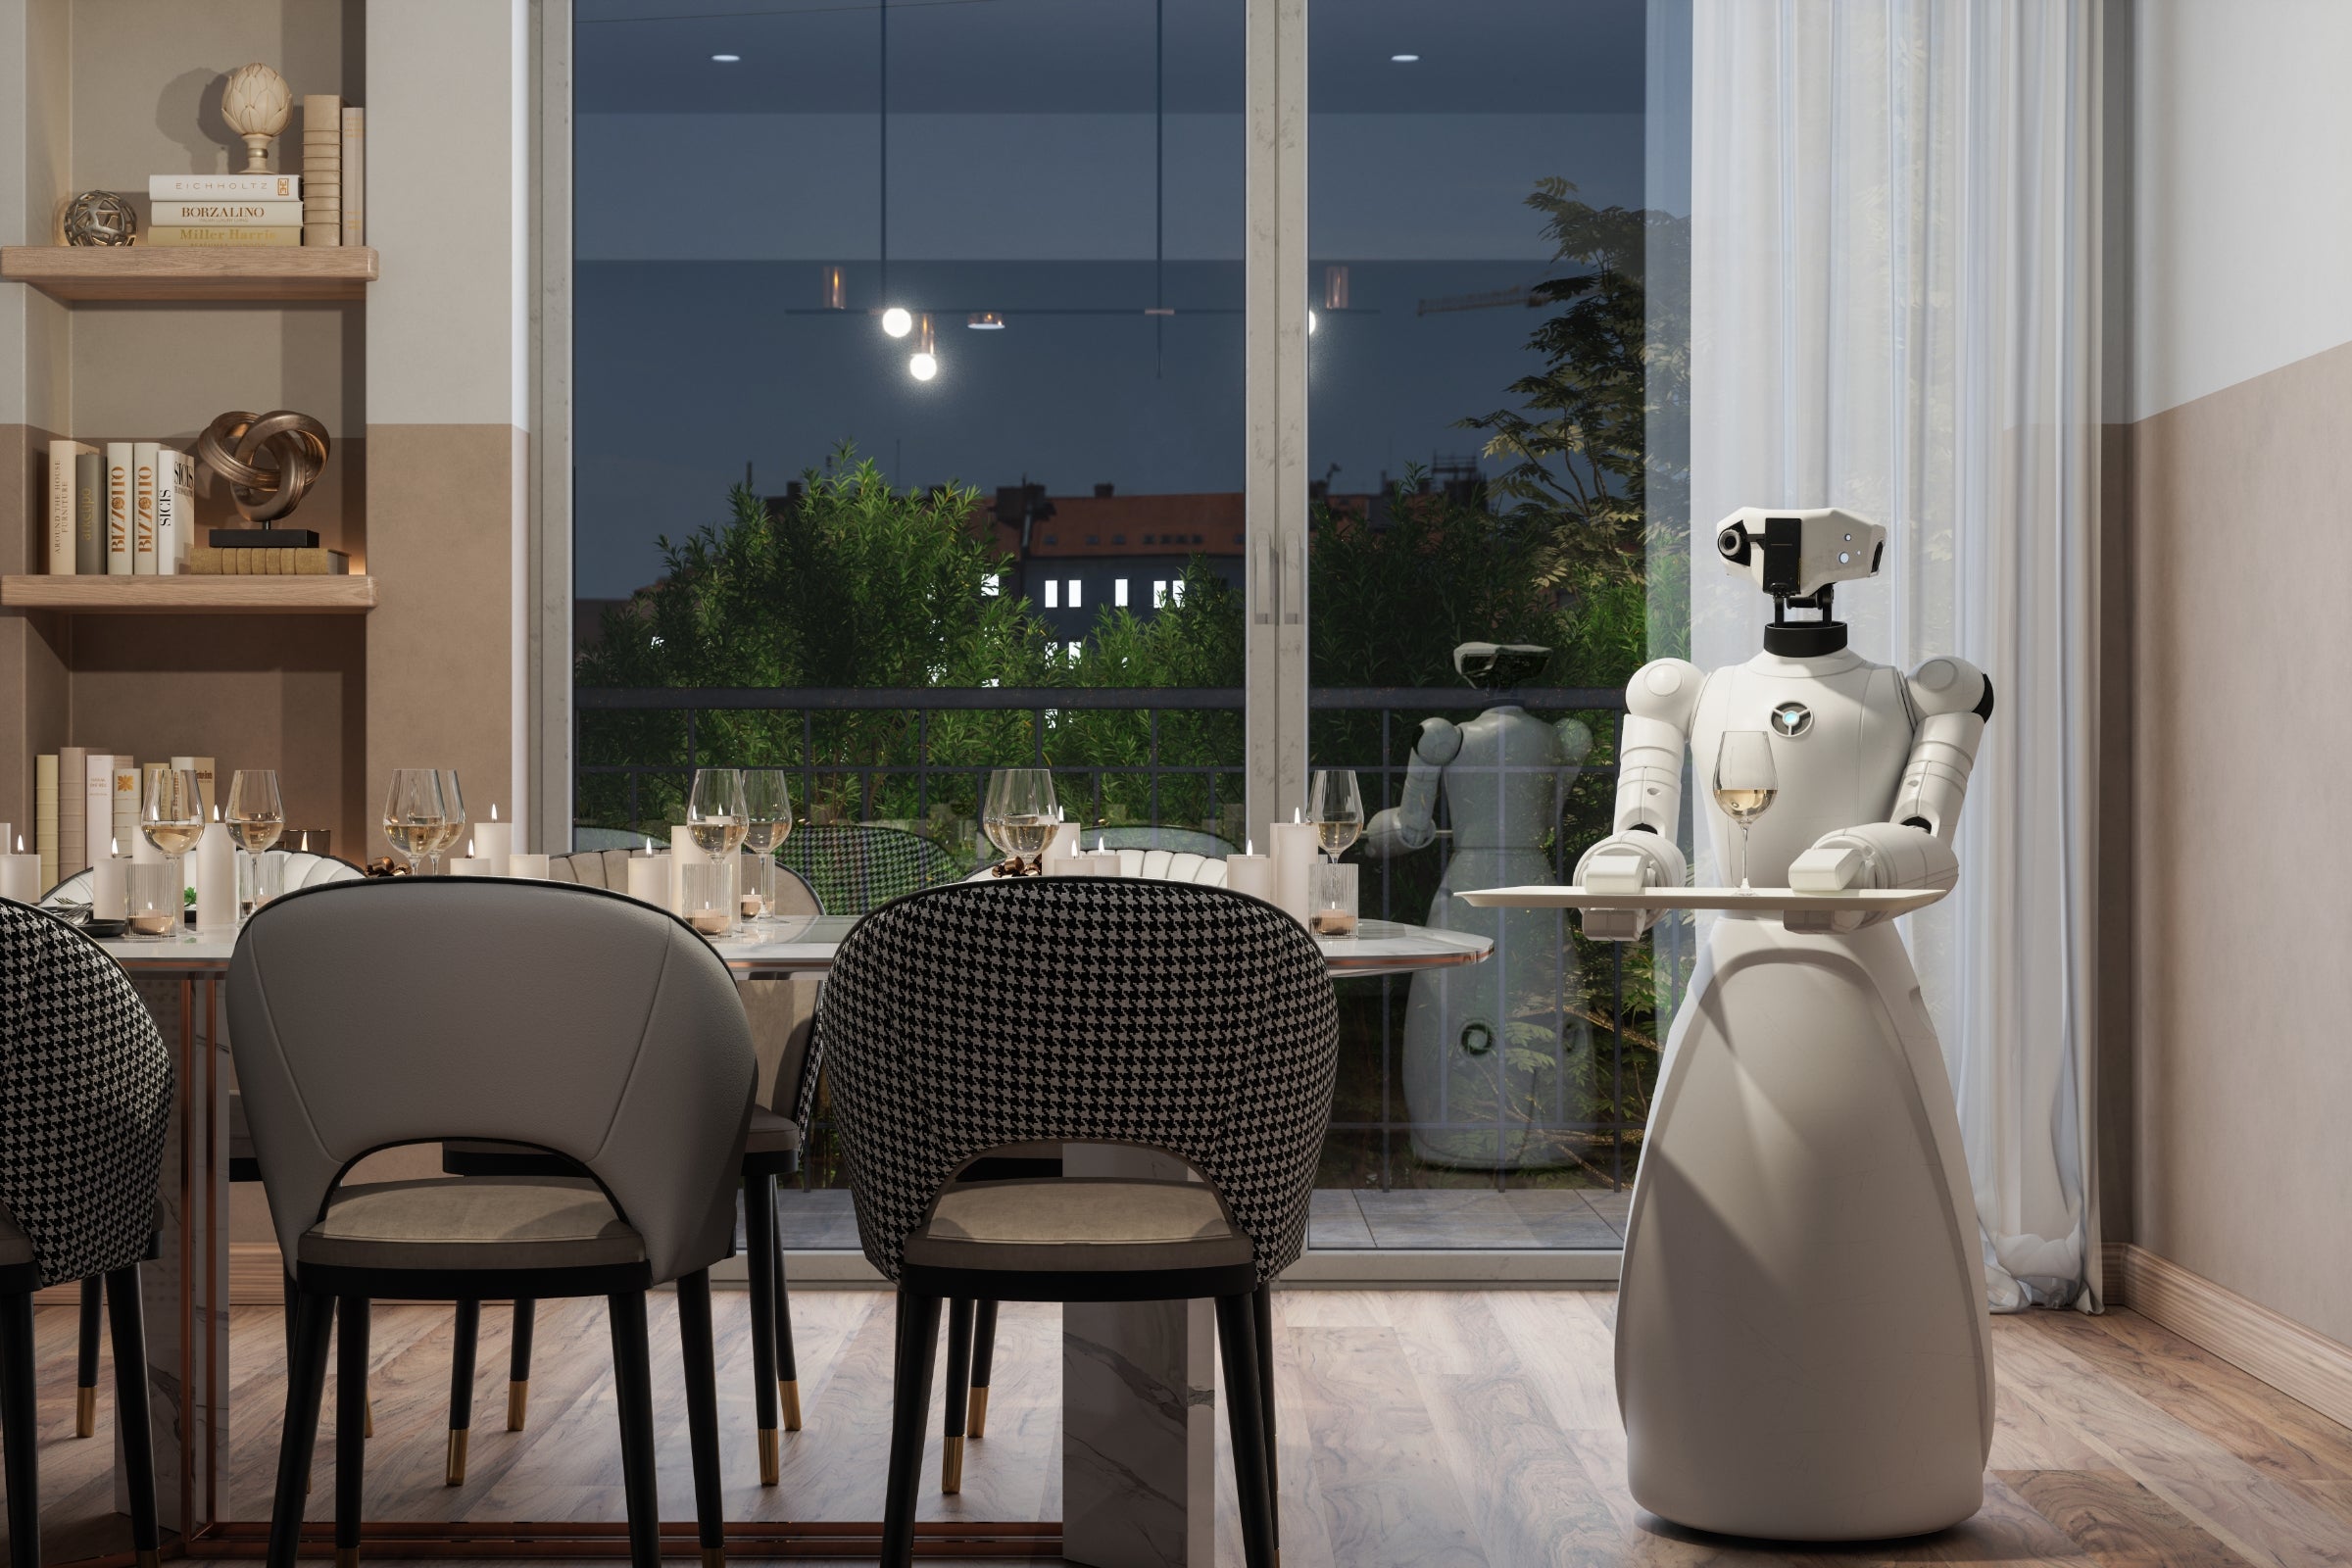 Robot assistant standing with serving tray in living room.